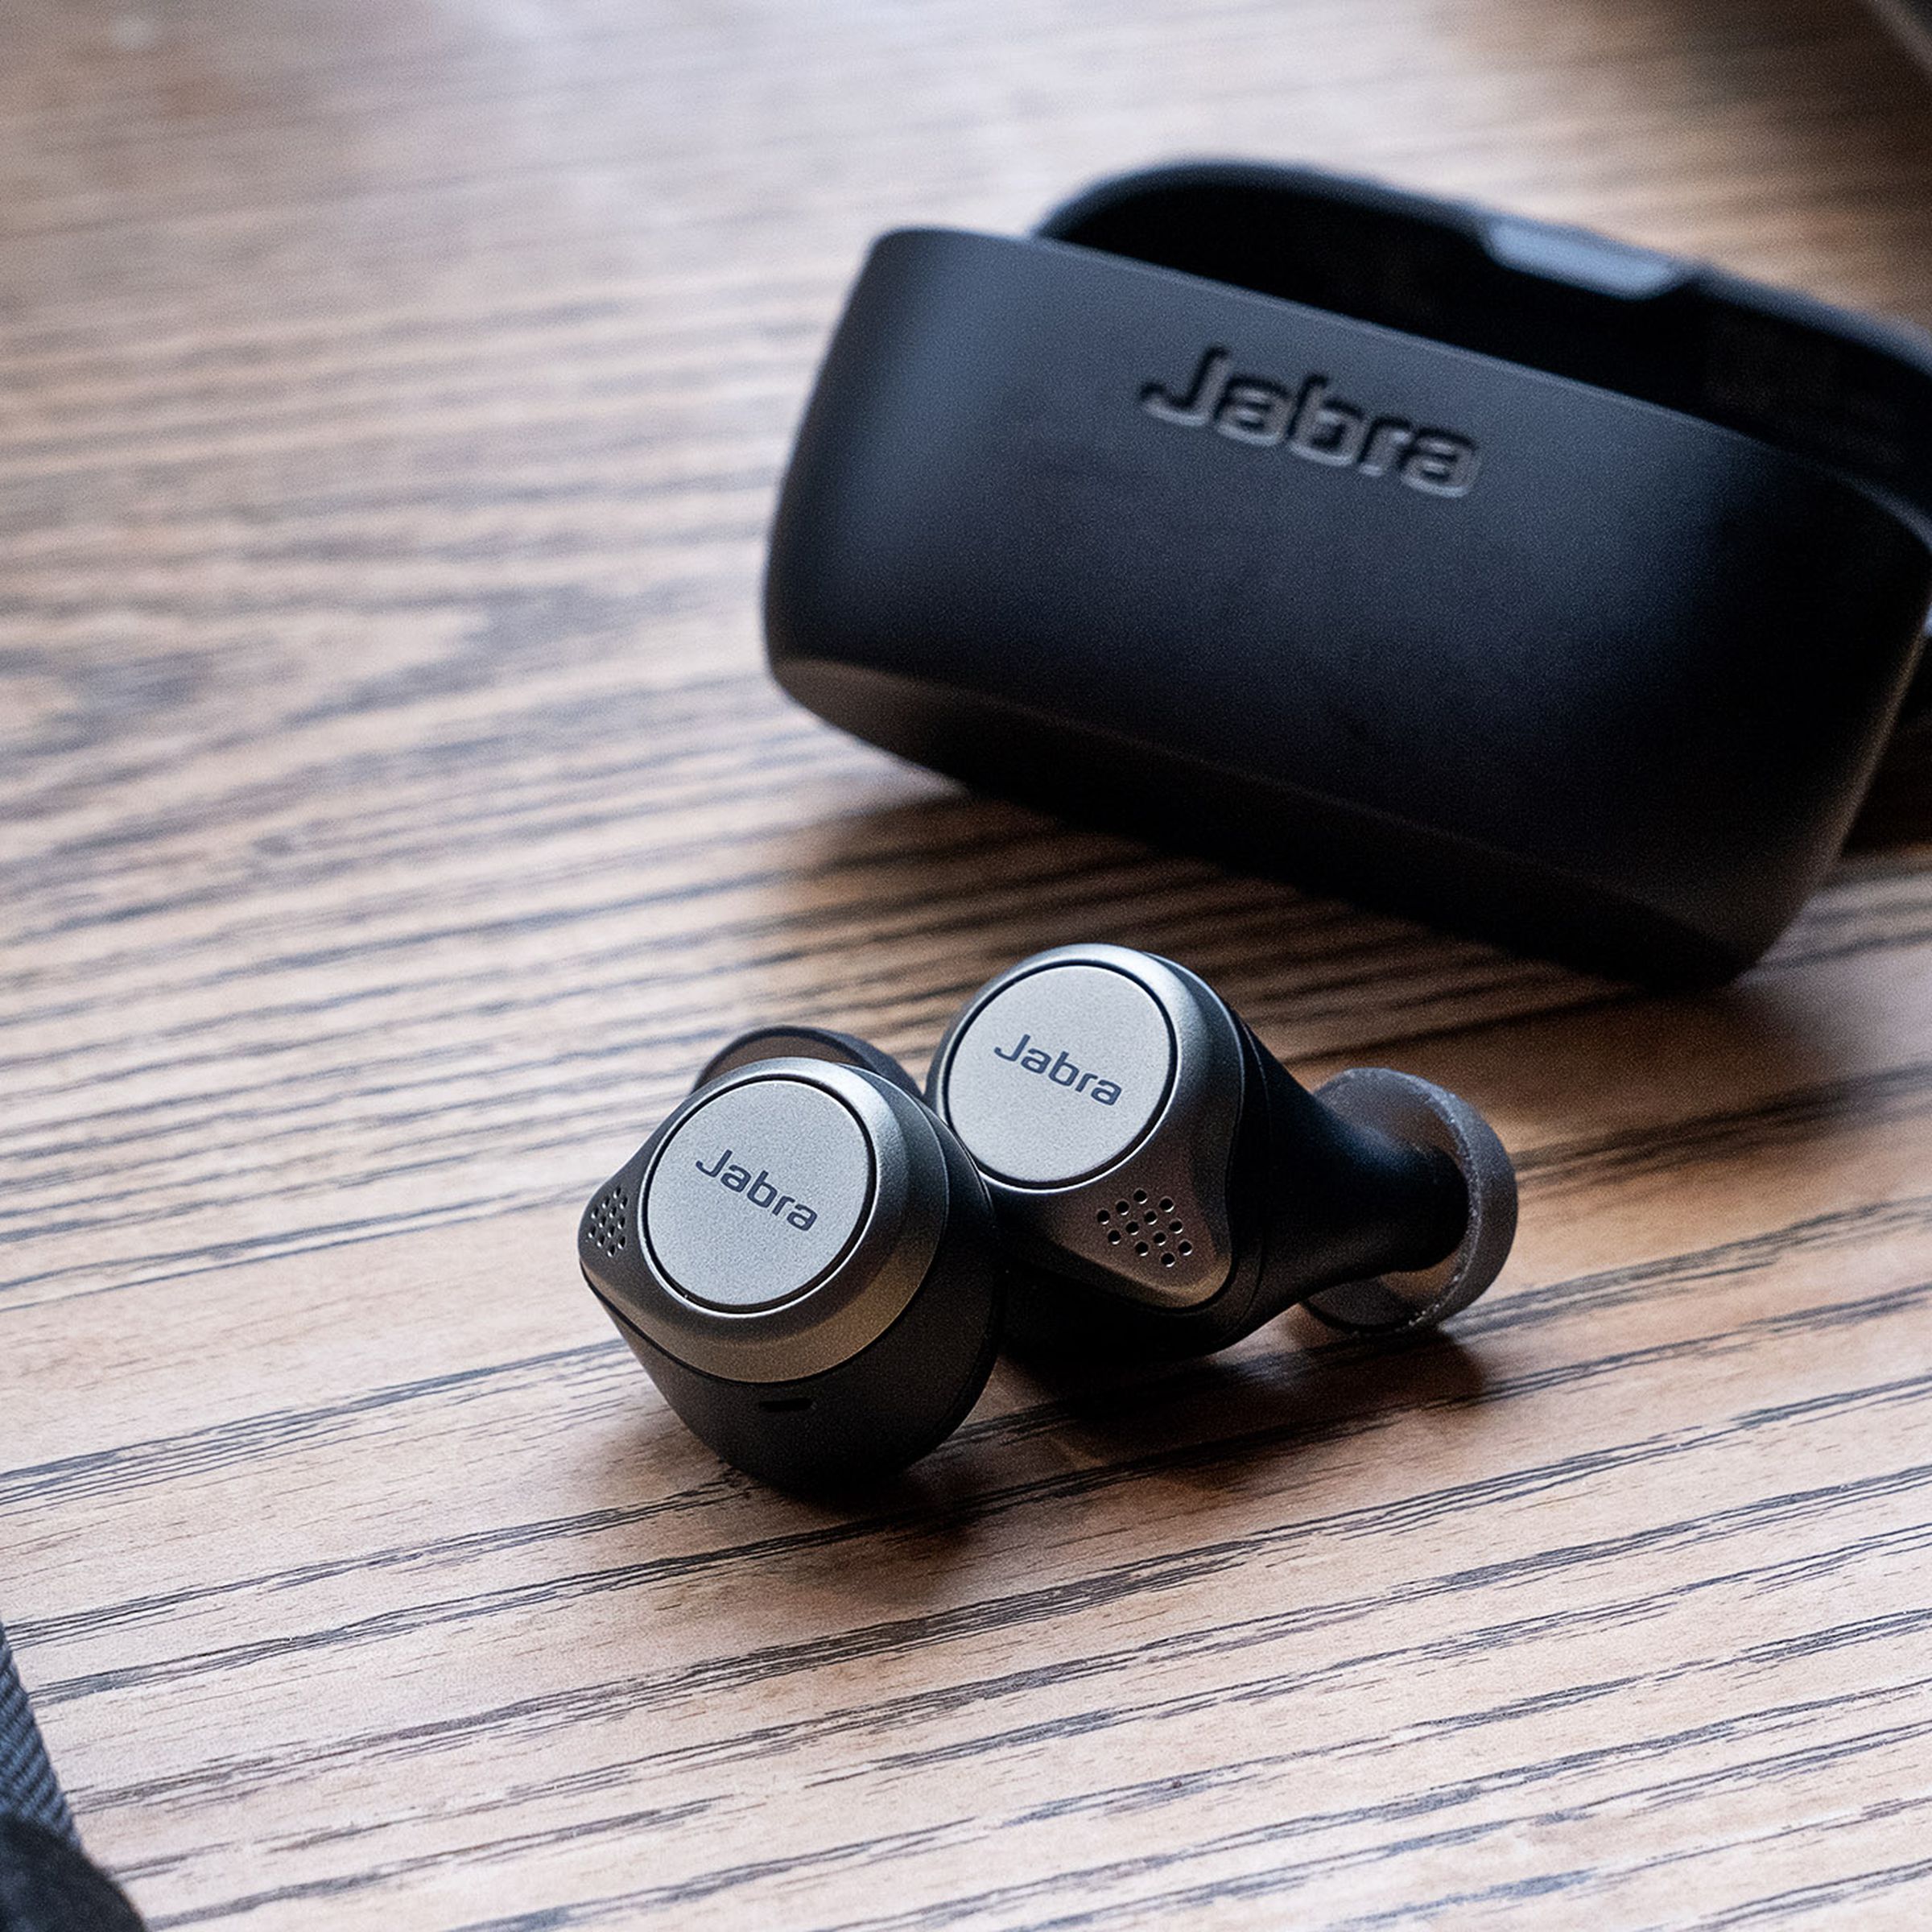 Jabra’s Elite 75t, the best wireless earbuds for multitasking, pictured on a table.